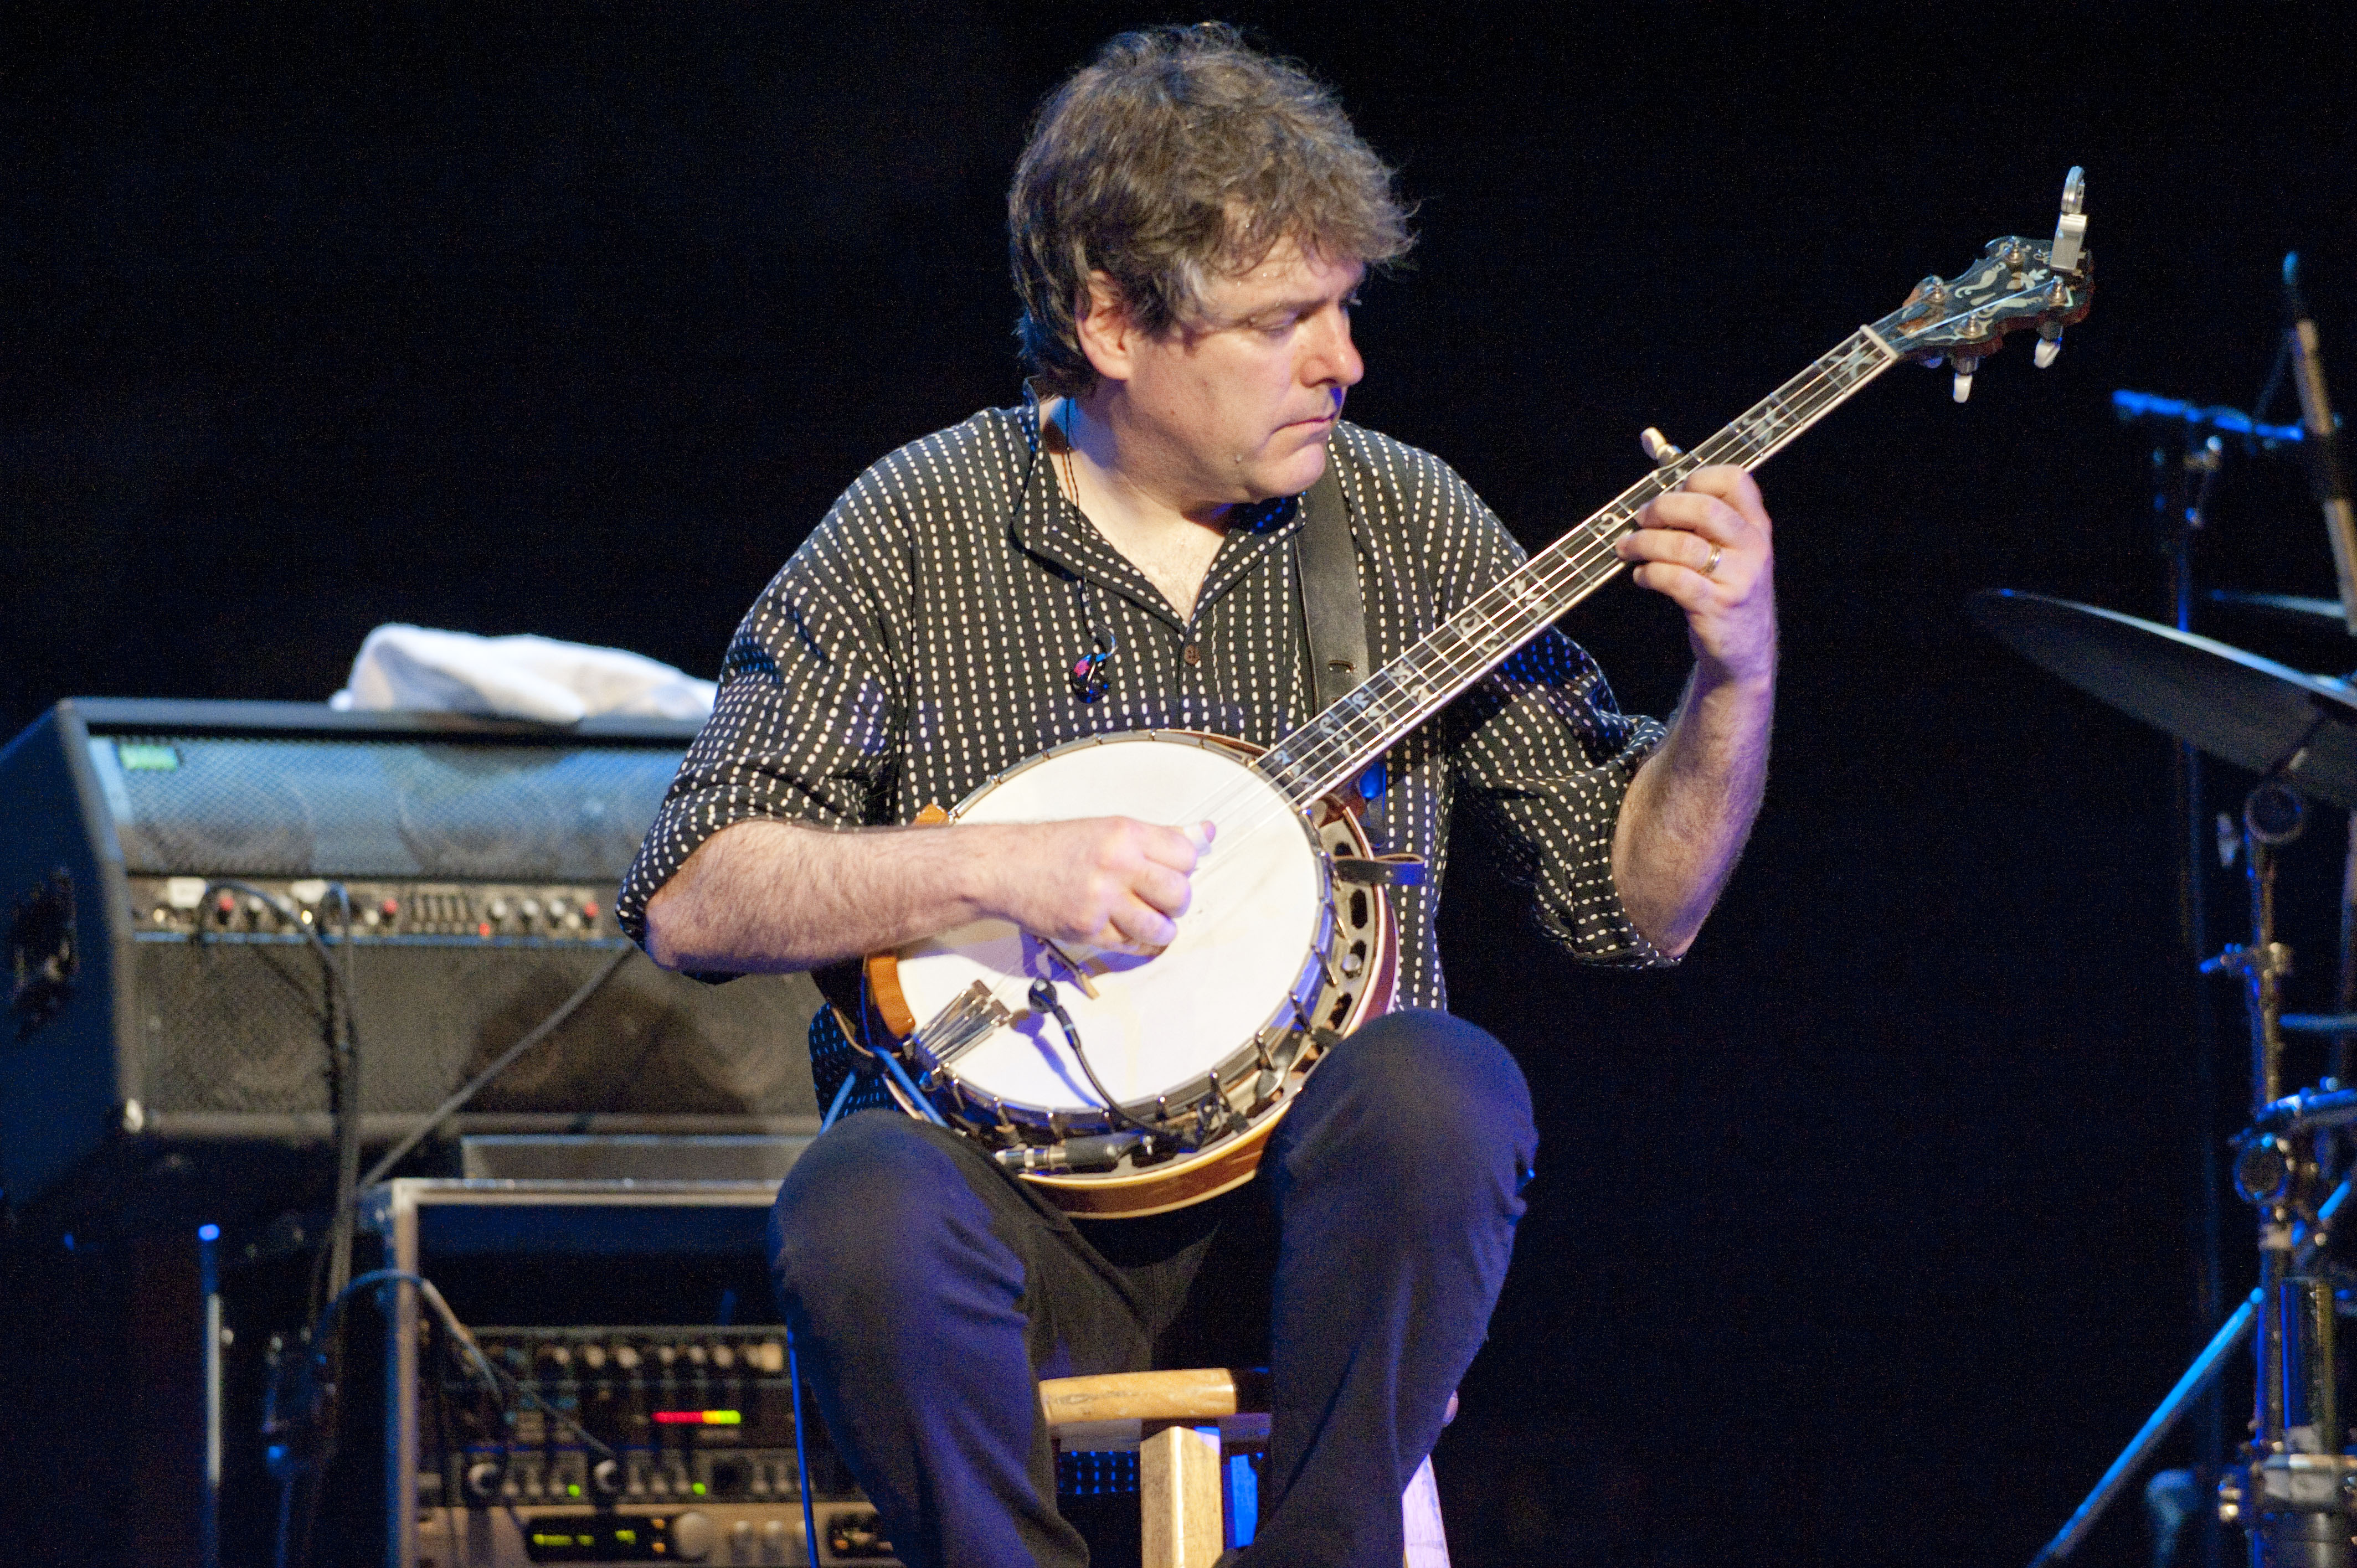 Quotes By Bela Fleck Like Success